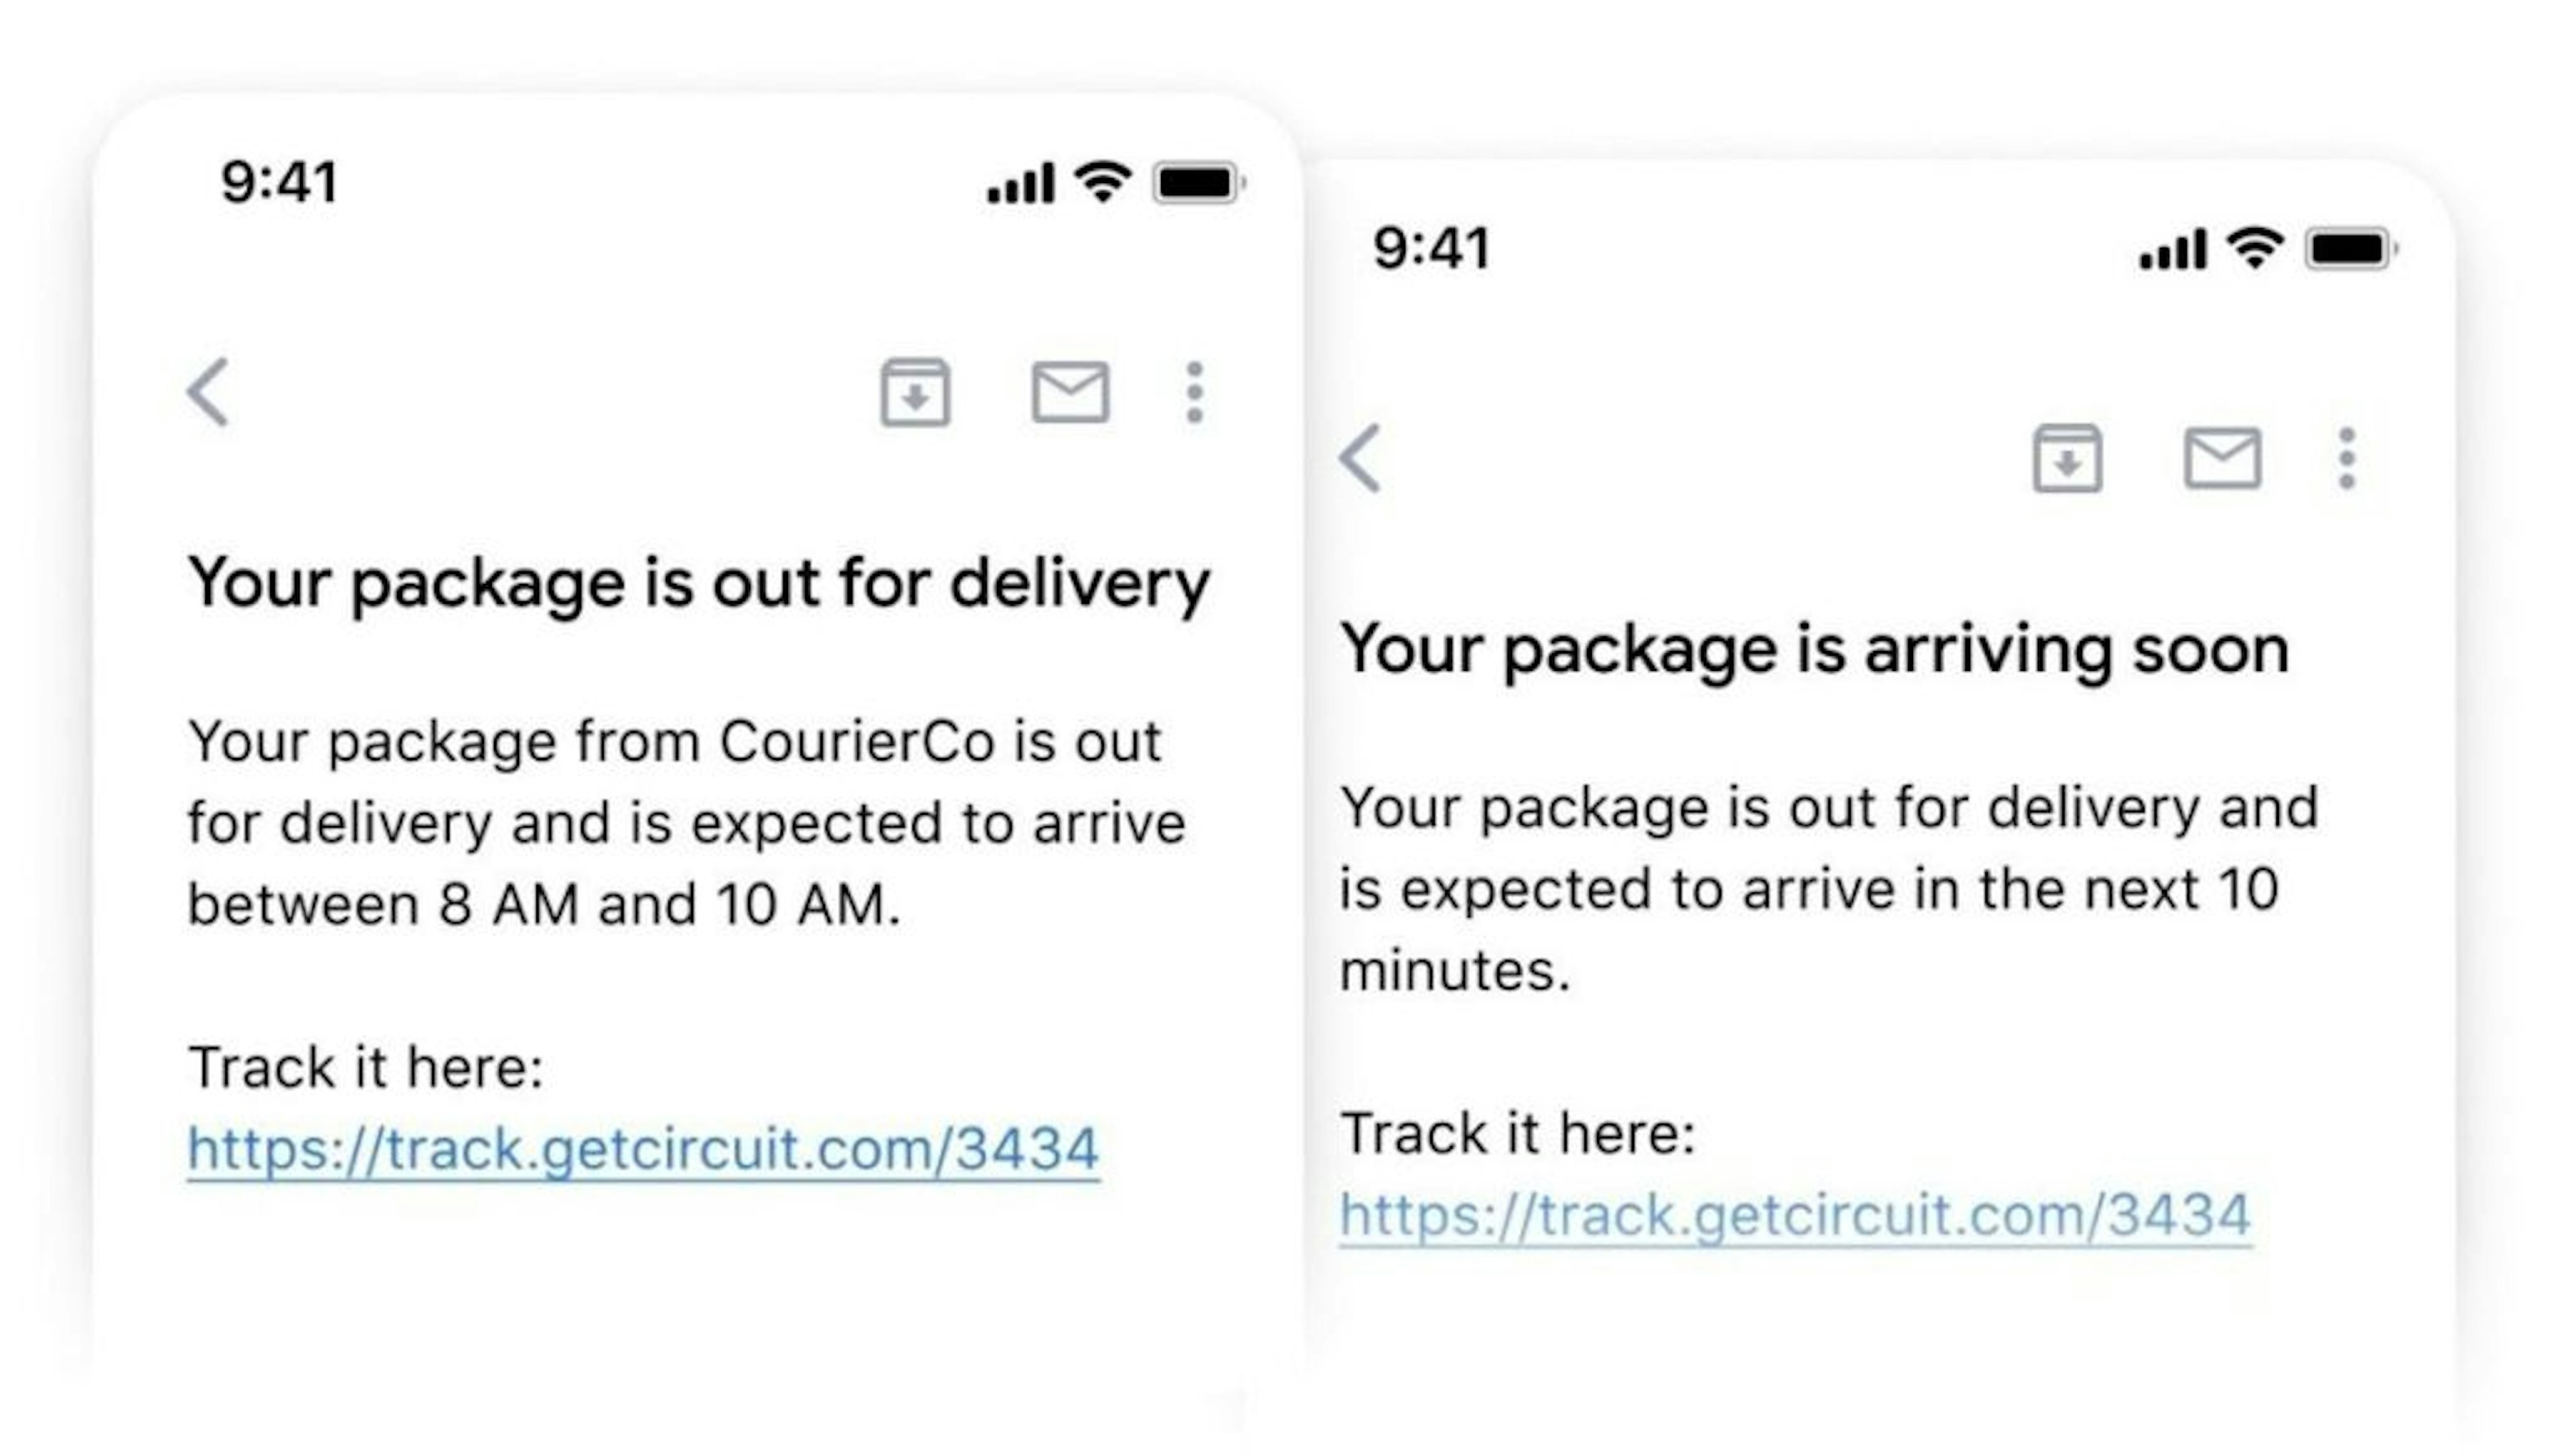 Phone message saying &quot;Your package is out for delivery - Track it here&quot;. Second phone message saying &quot;Your Package is arriving soon - Track it here&quot;